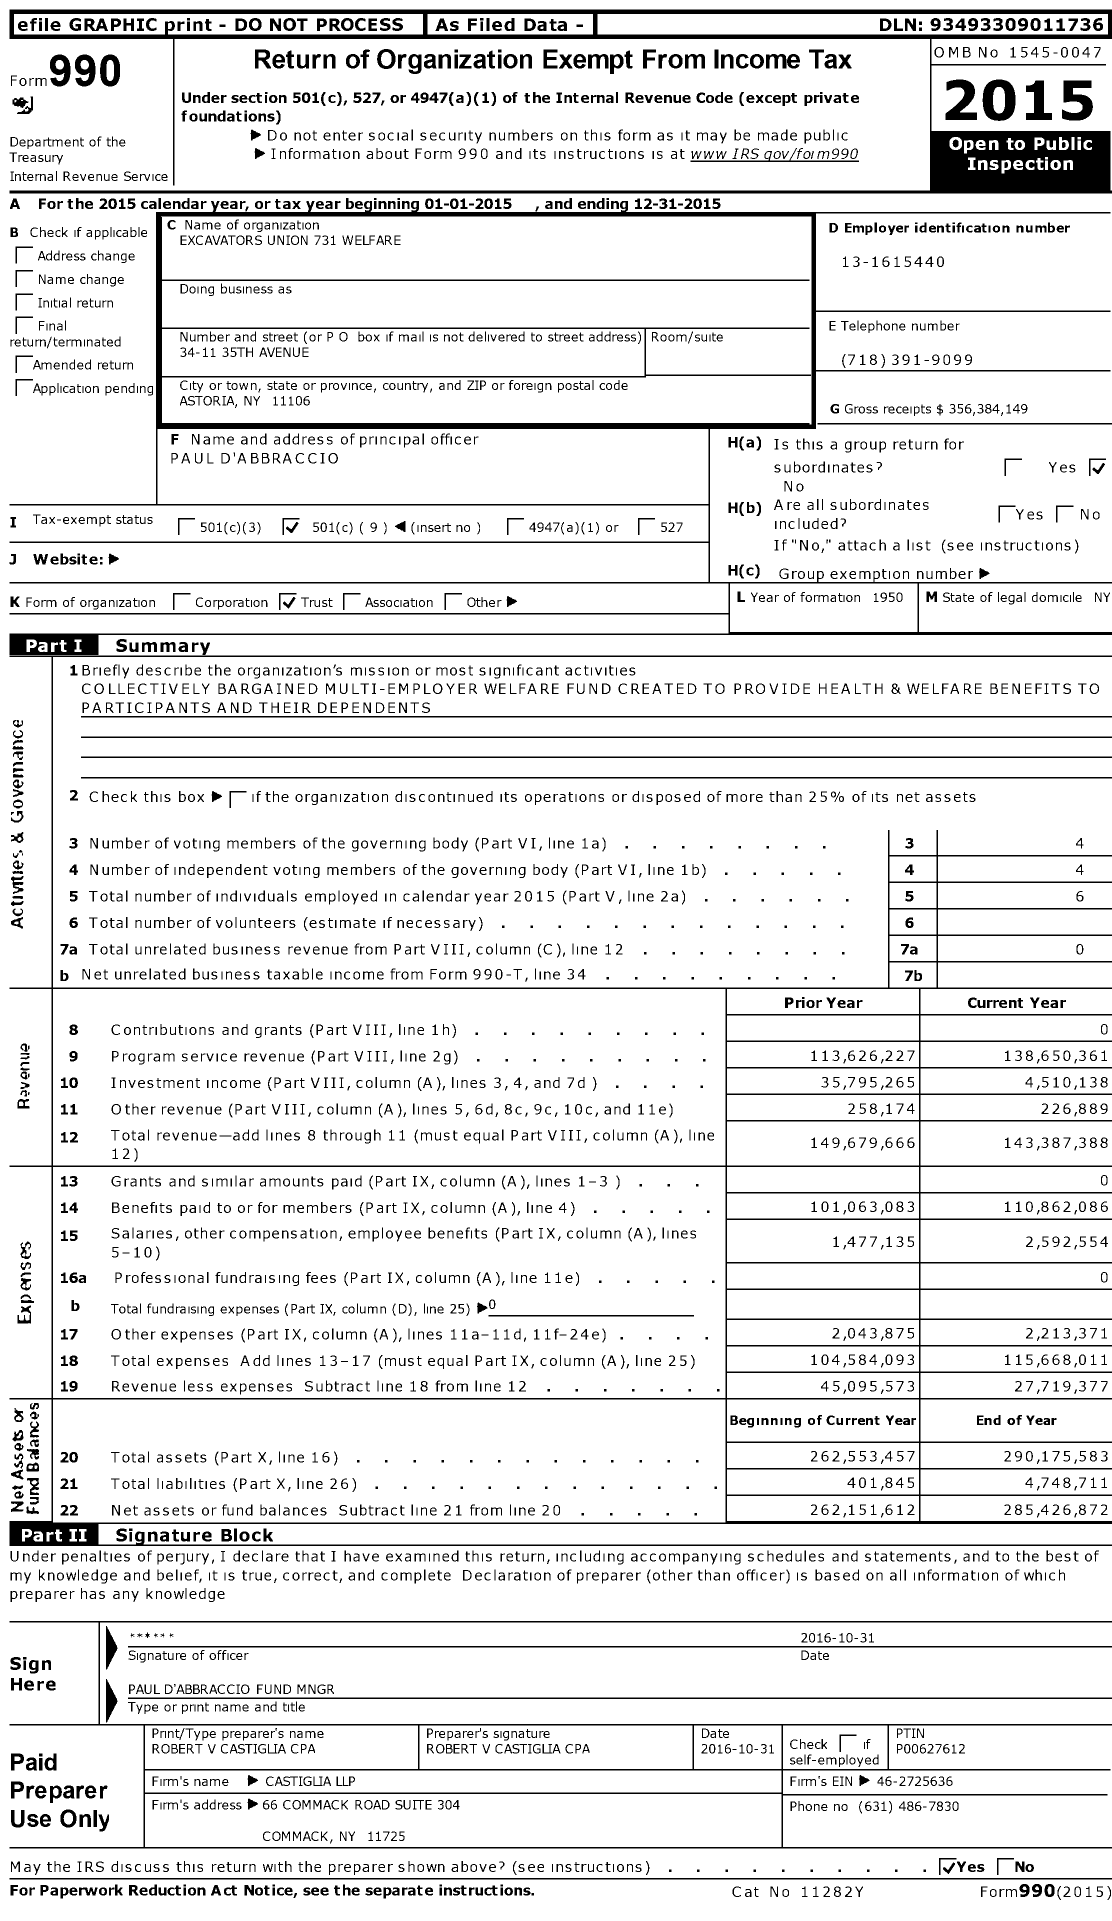 Image of first page of 2015 Form 990O for Excavators Union 731 Welfare